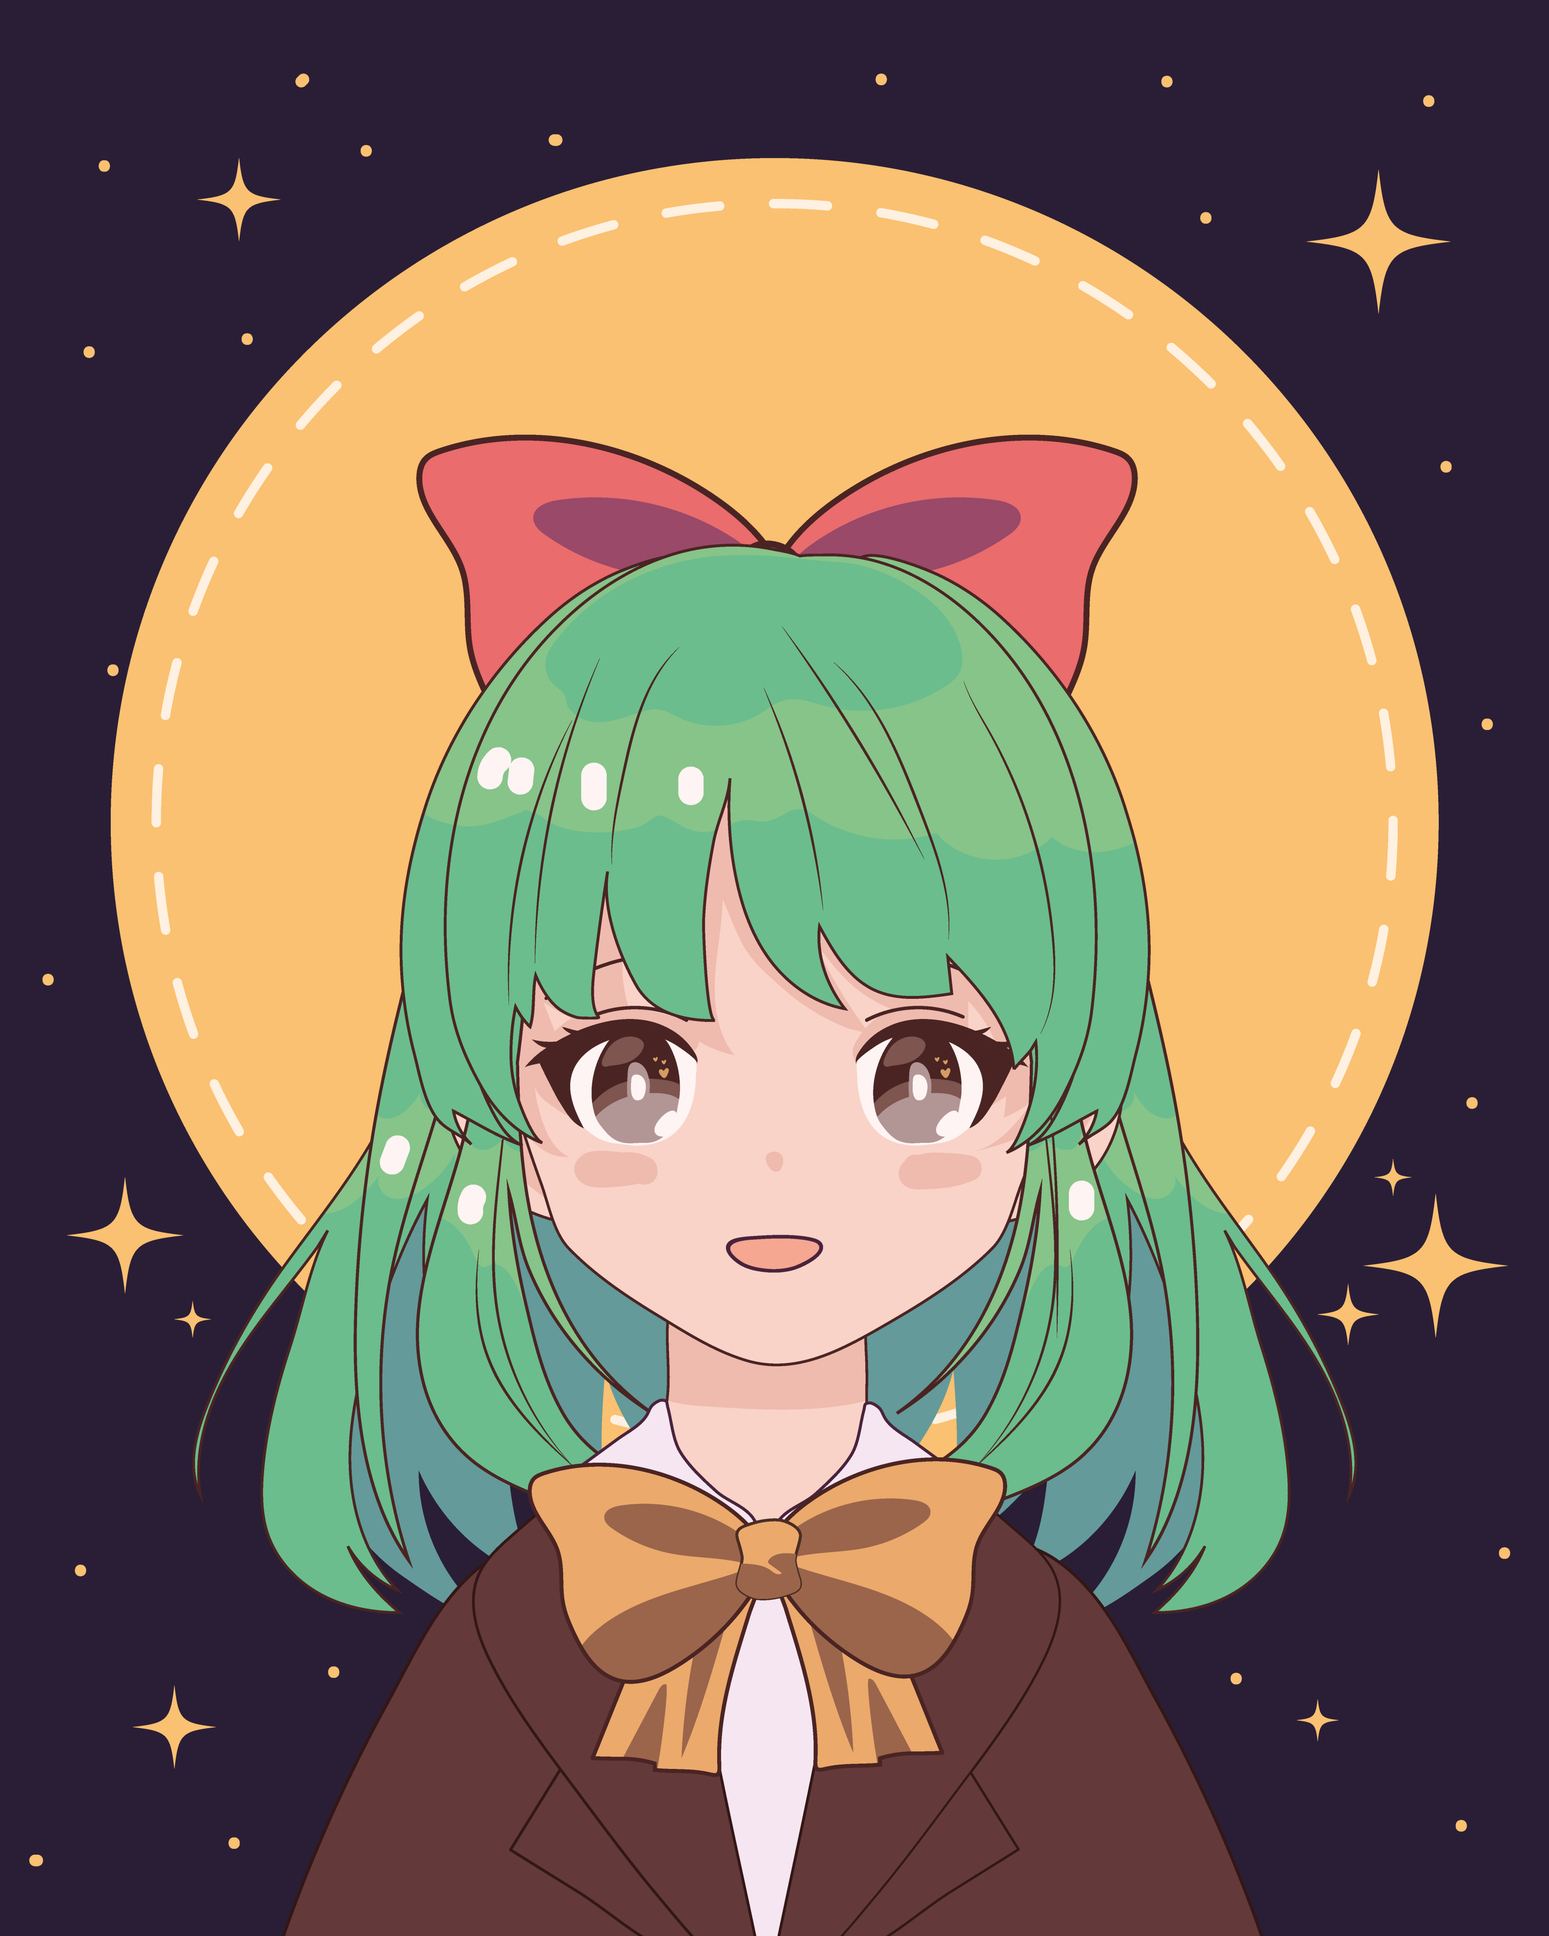 manga style girl with long green hair a bow tie and a bow in her hair she is standing in front of a yellow full moon and a starry sky